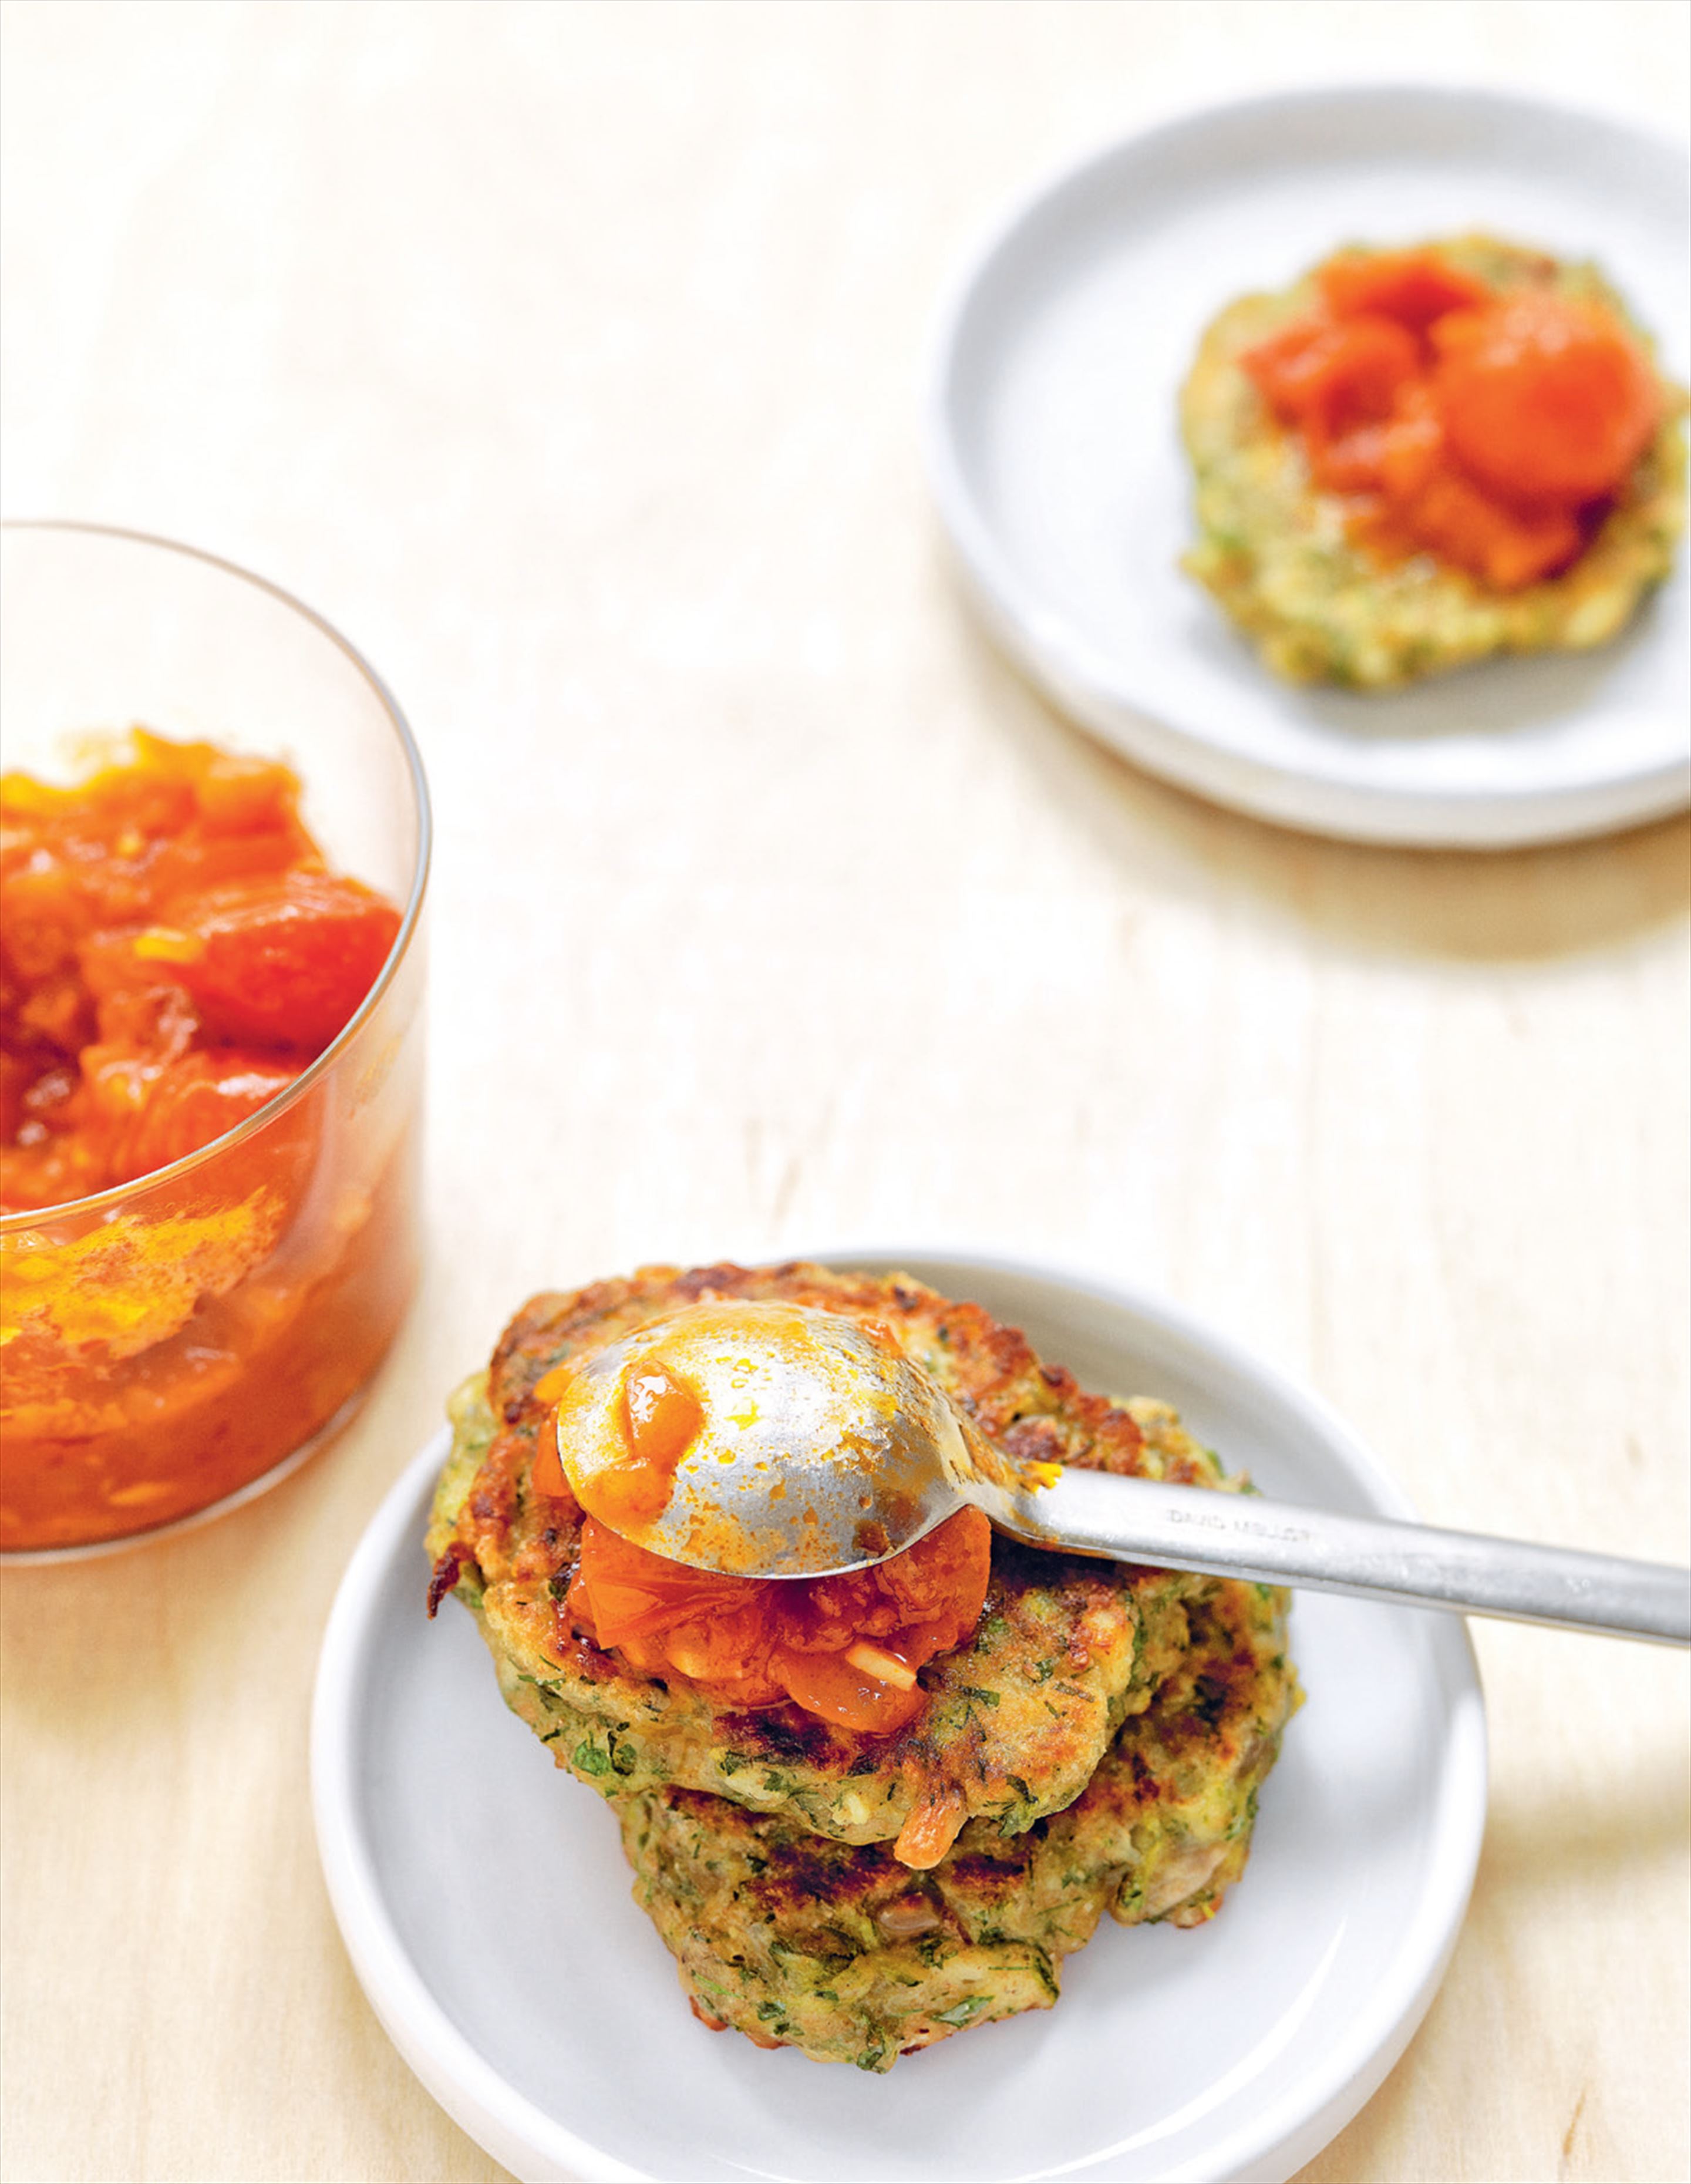 Zucchini & feta fritters with sunflower kernels & tomato sauce